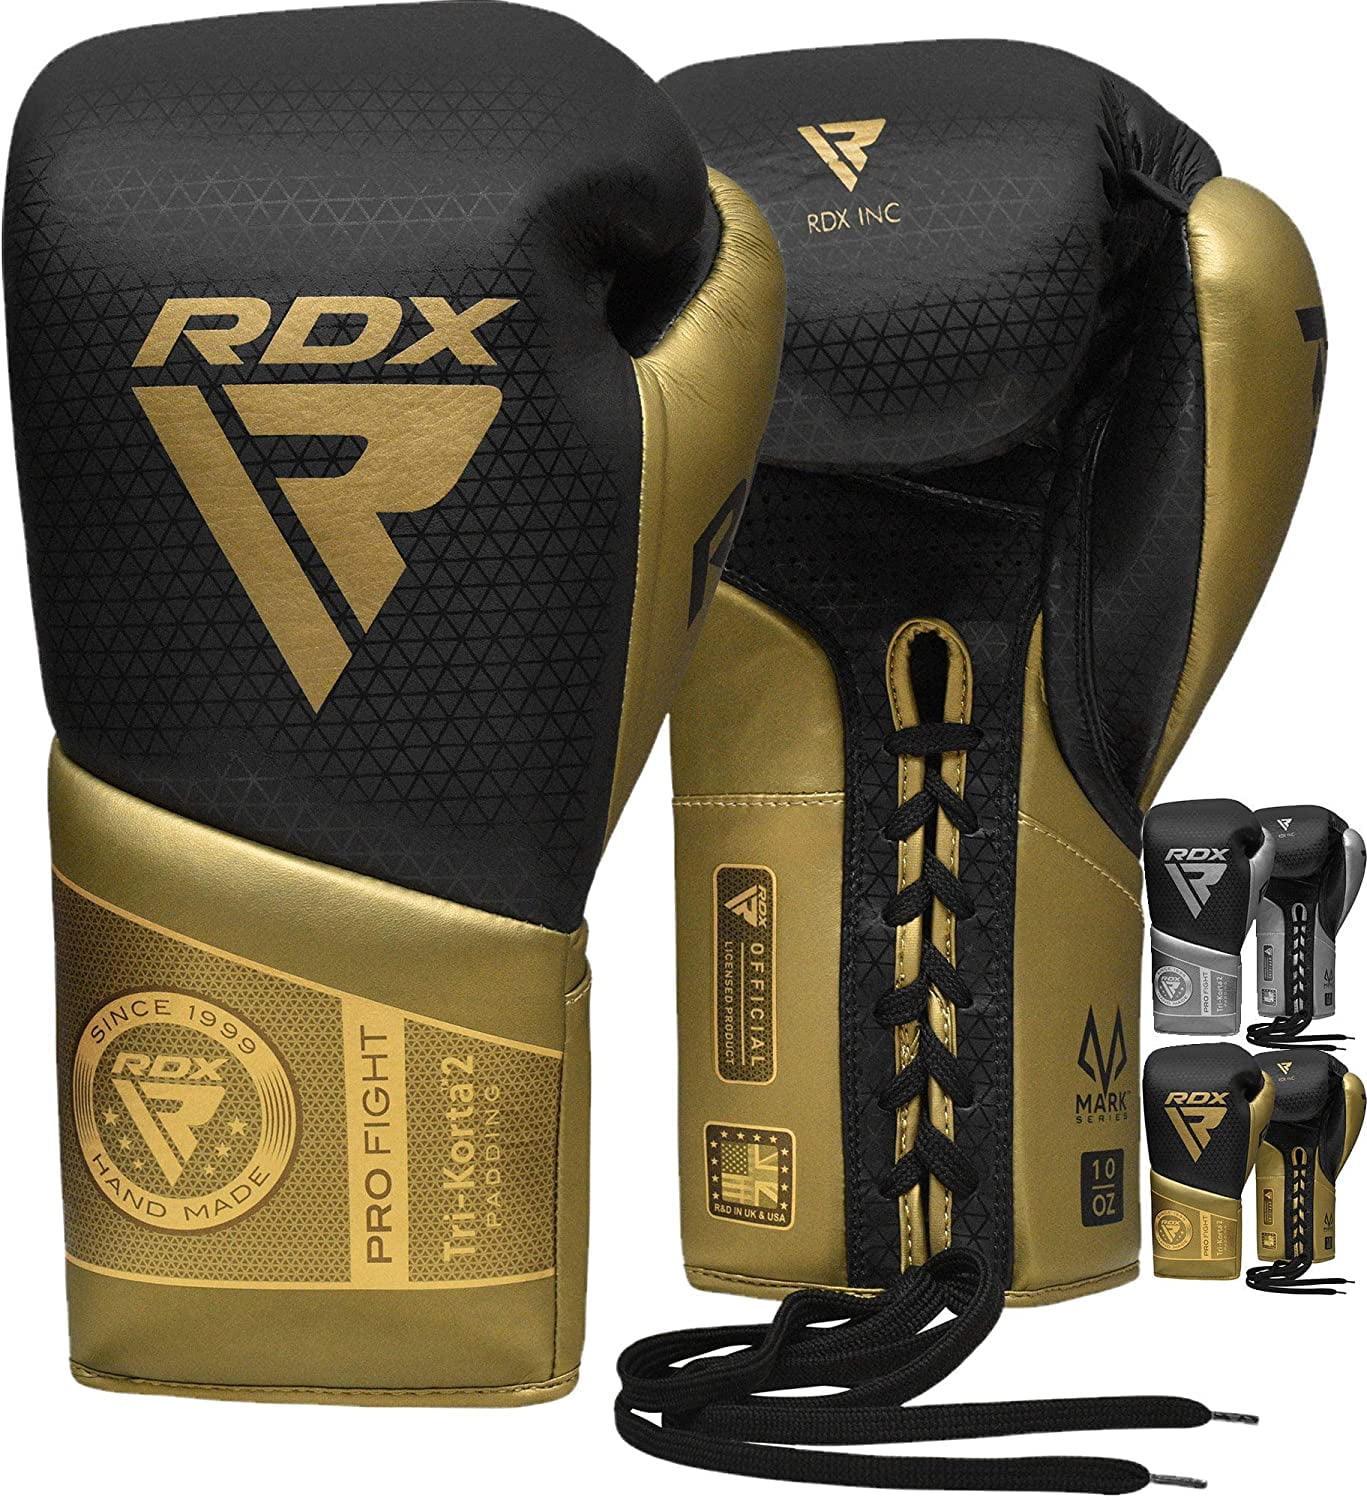 Maxx® Maya Leather Boxing Gloves MMA Training Fight Sparring Pad Glove Punch B/W 